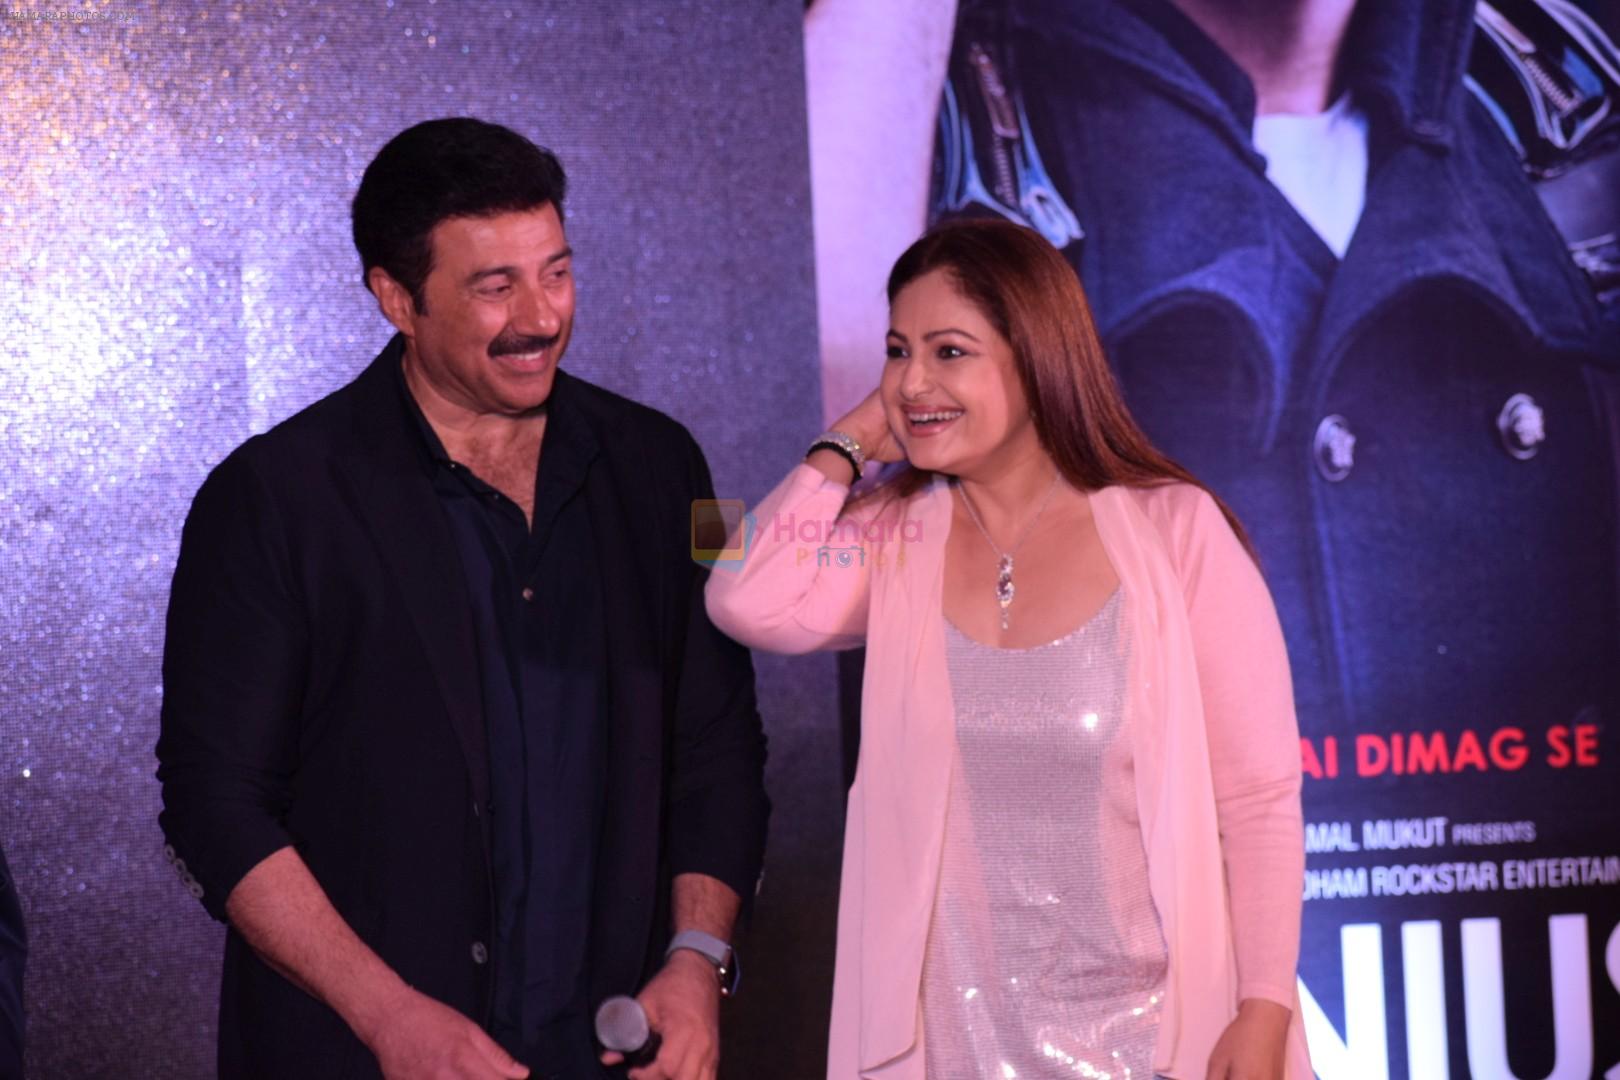 Sunny Deol, Ayesha Jhulka at Successful Post Shoot Wrap Up Party On Anil Shrma Birthday on 7th March 2018